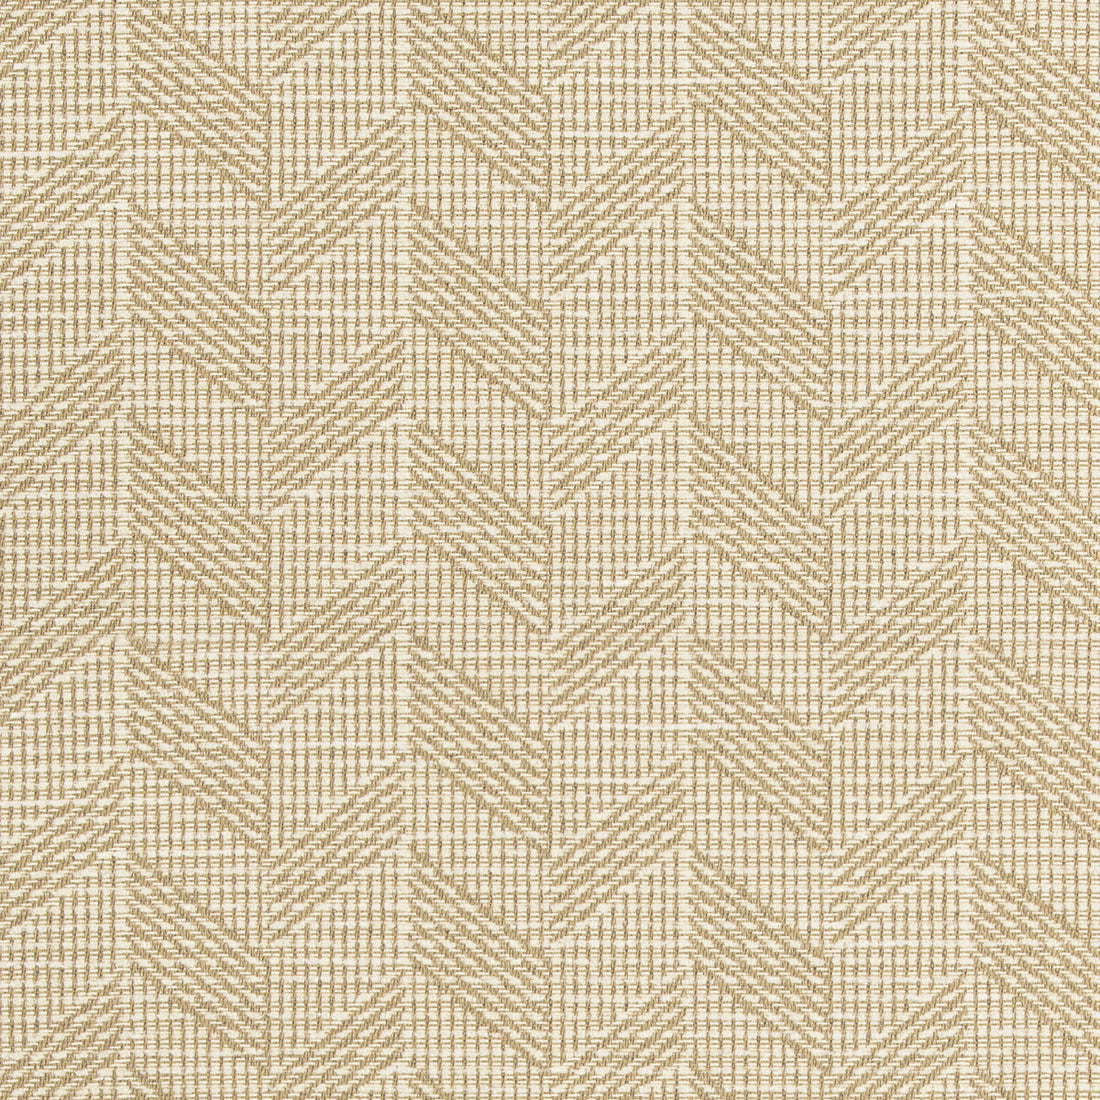 Cayuga fabric in flax color - pattern 35862.16.0 - by Kravet Contract in the Gis Crypton collection